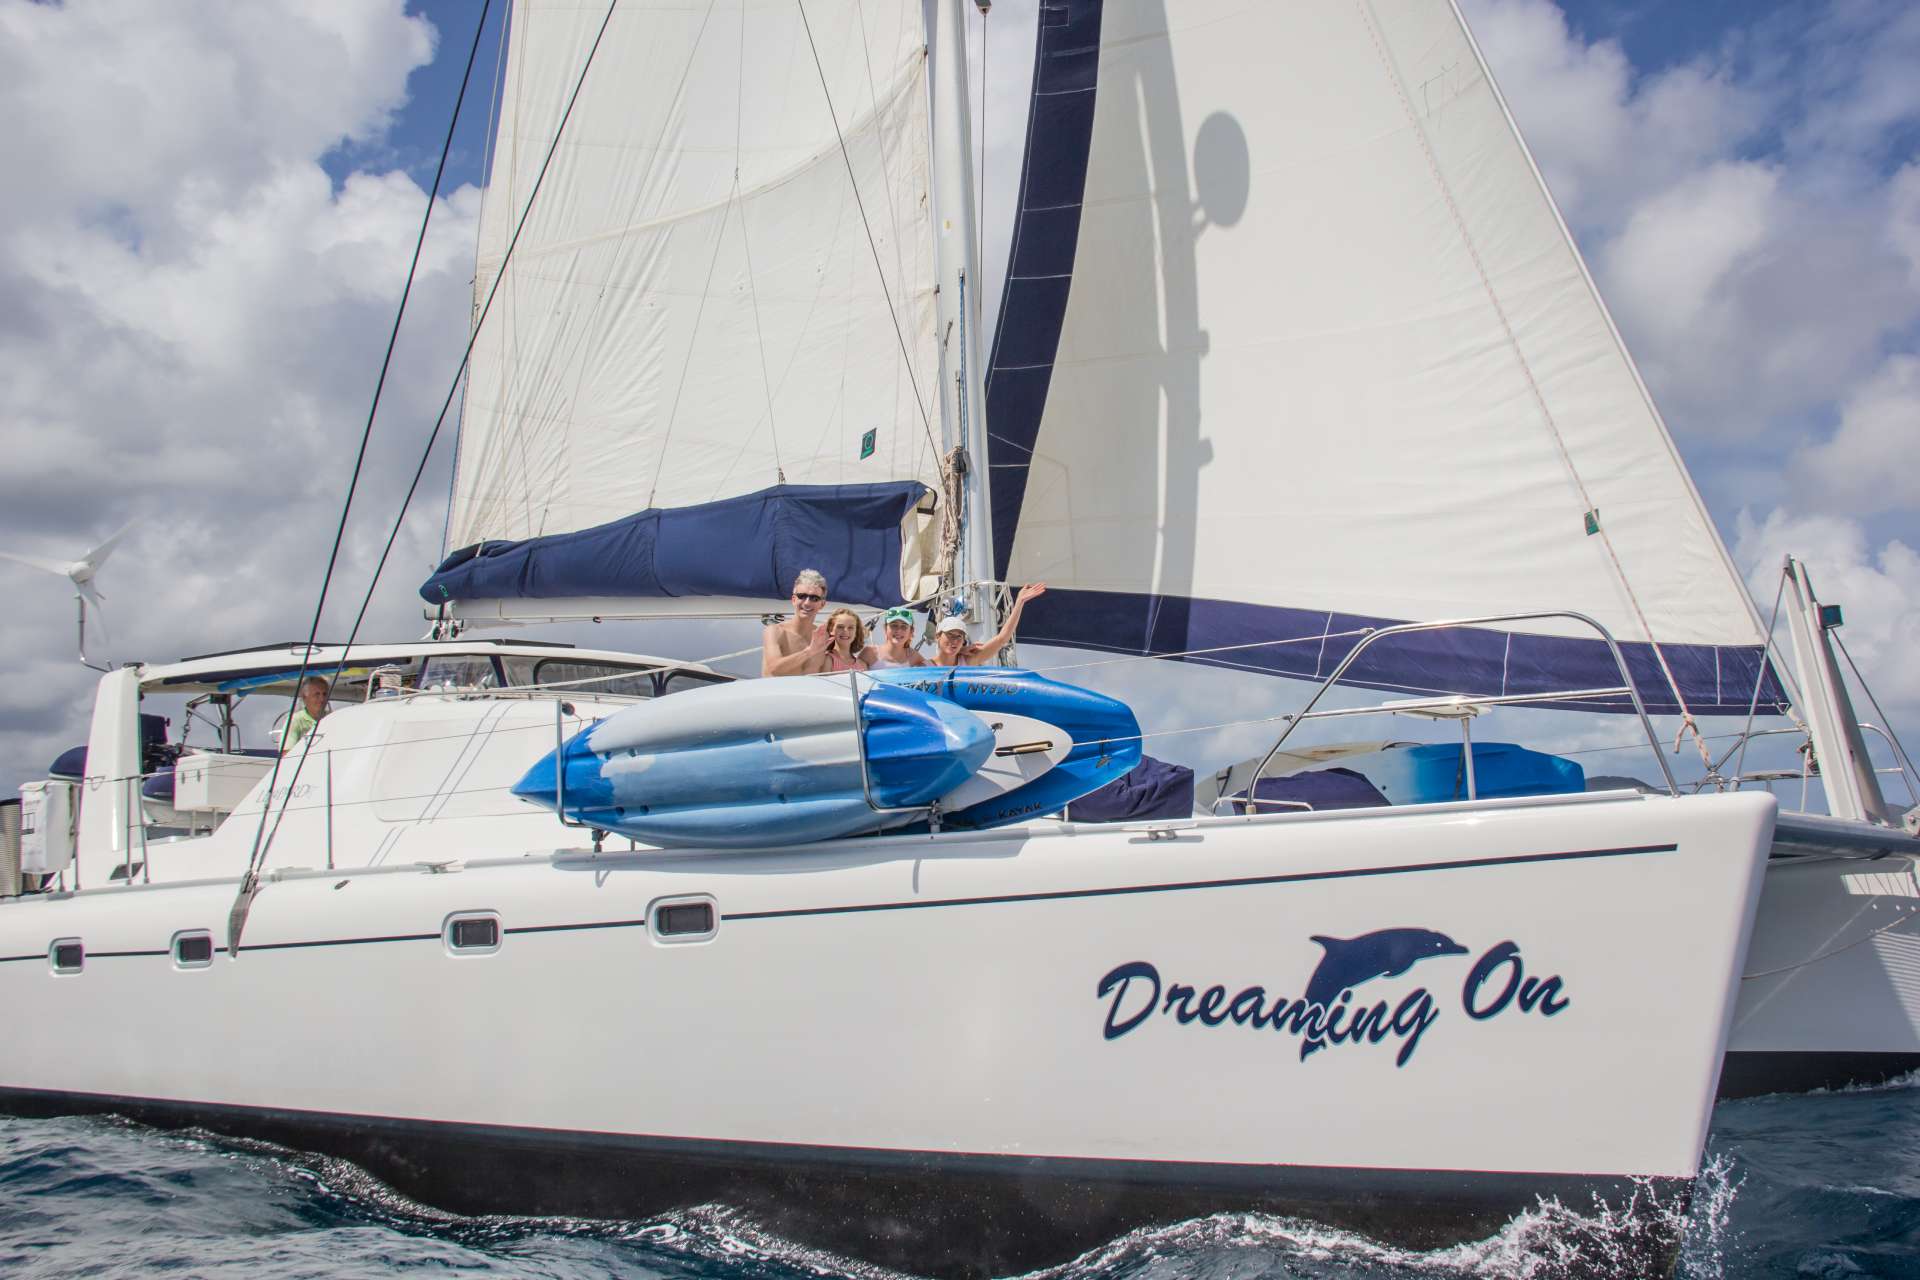 dreaming on - Catamaran charter Palma & Boat hire in Central america, Belize 2